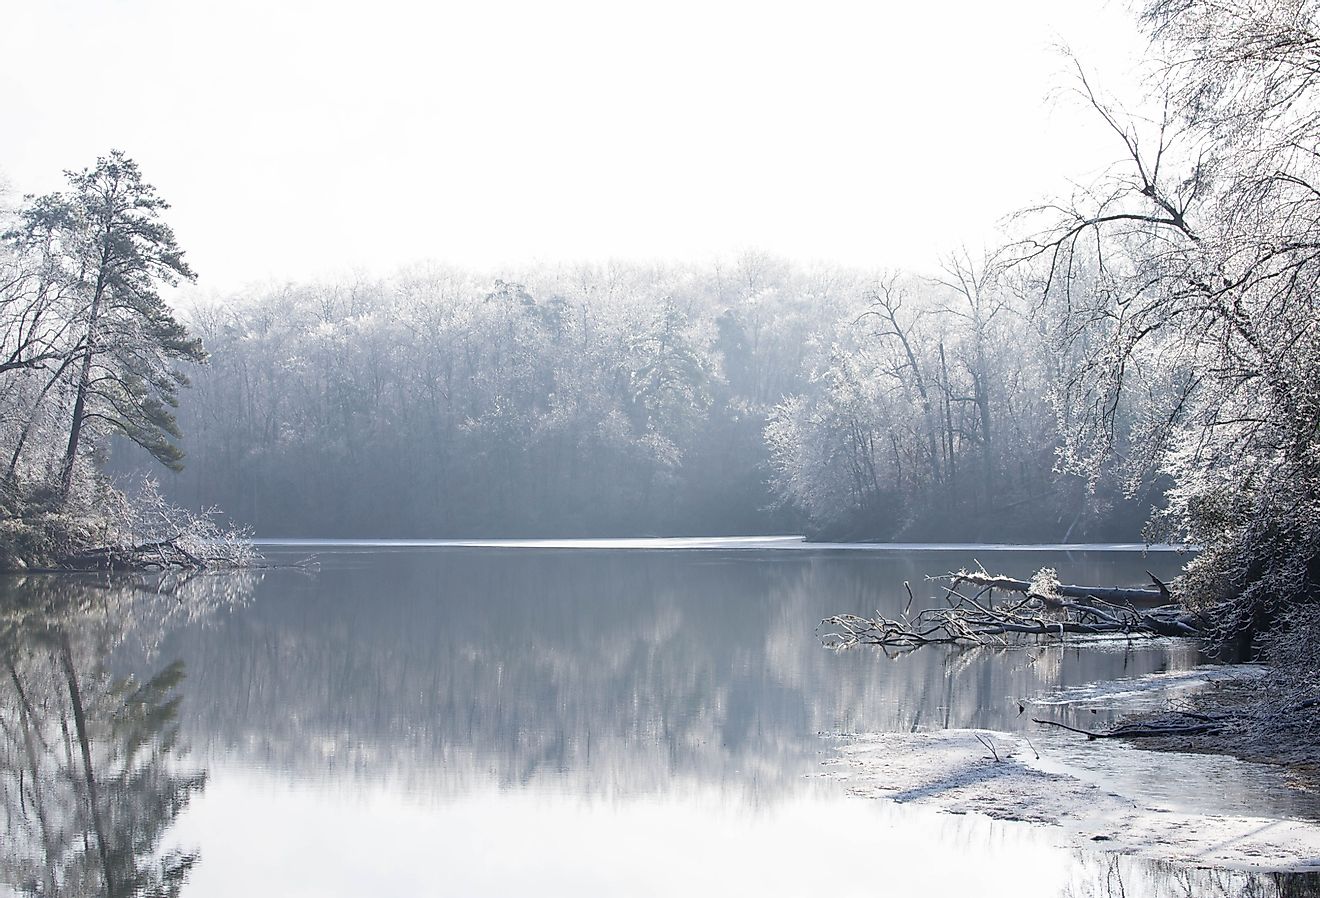 Frozen trees on a lake in Williamsburg, Virginia.